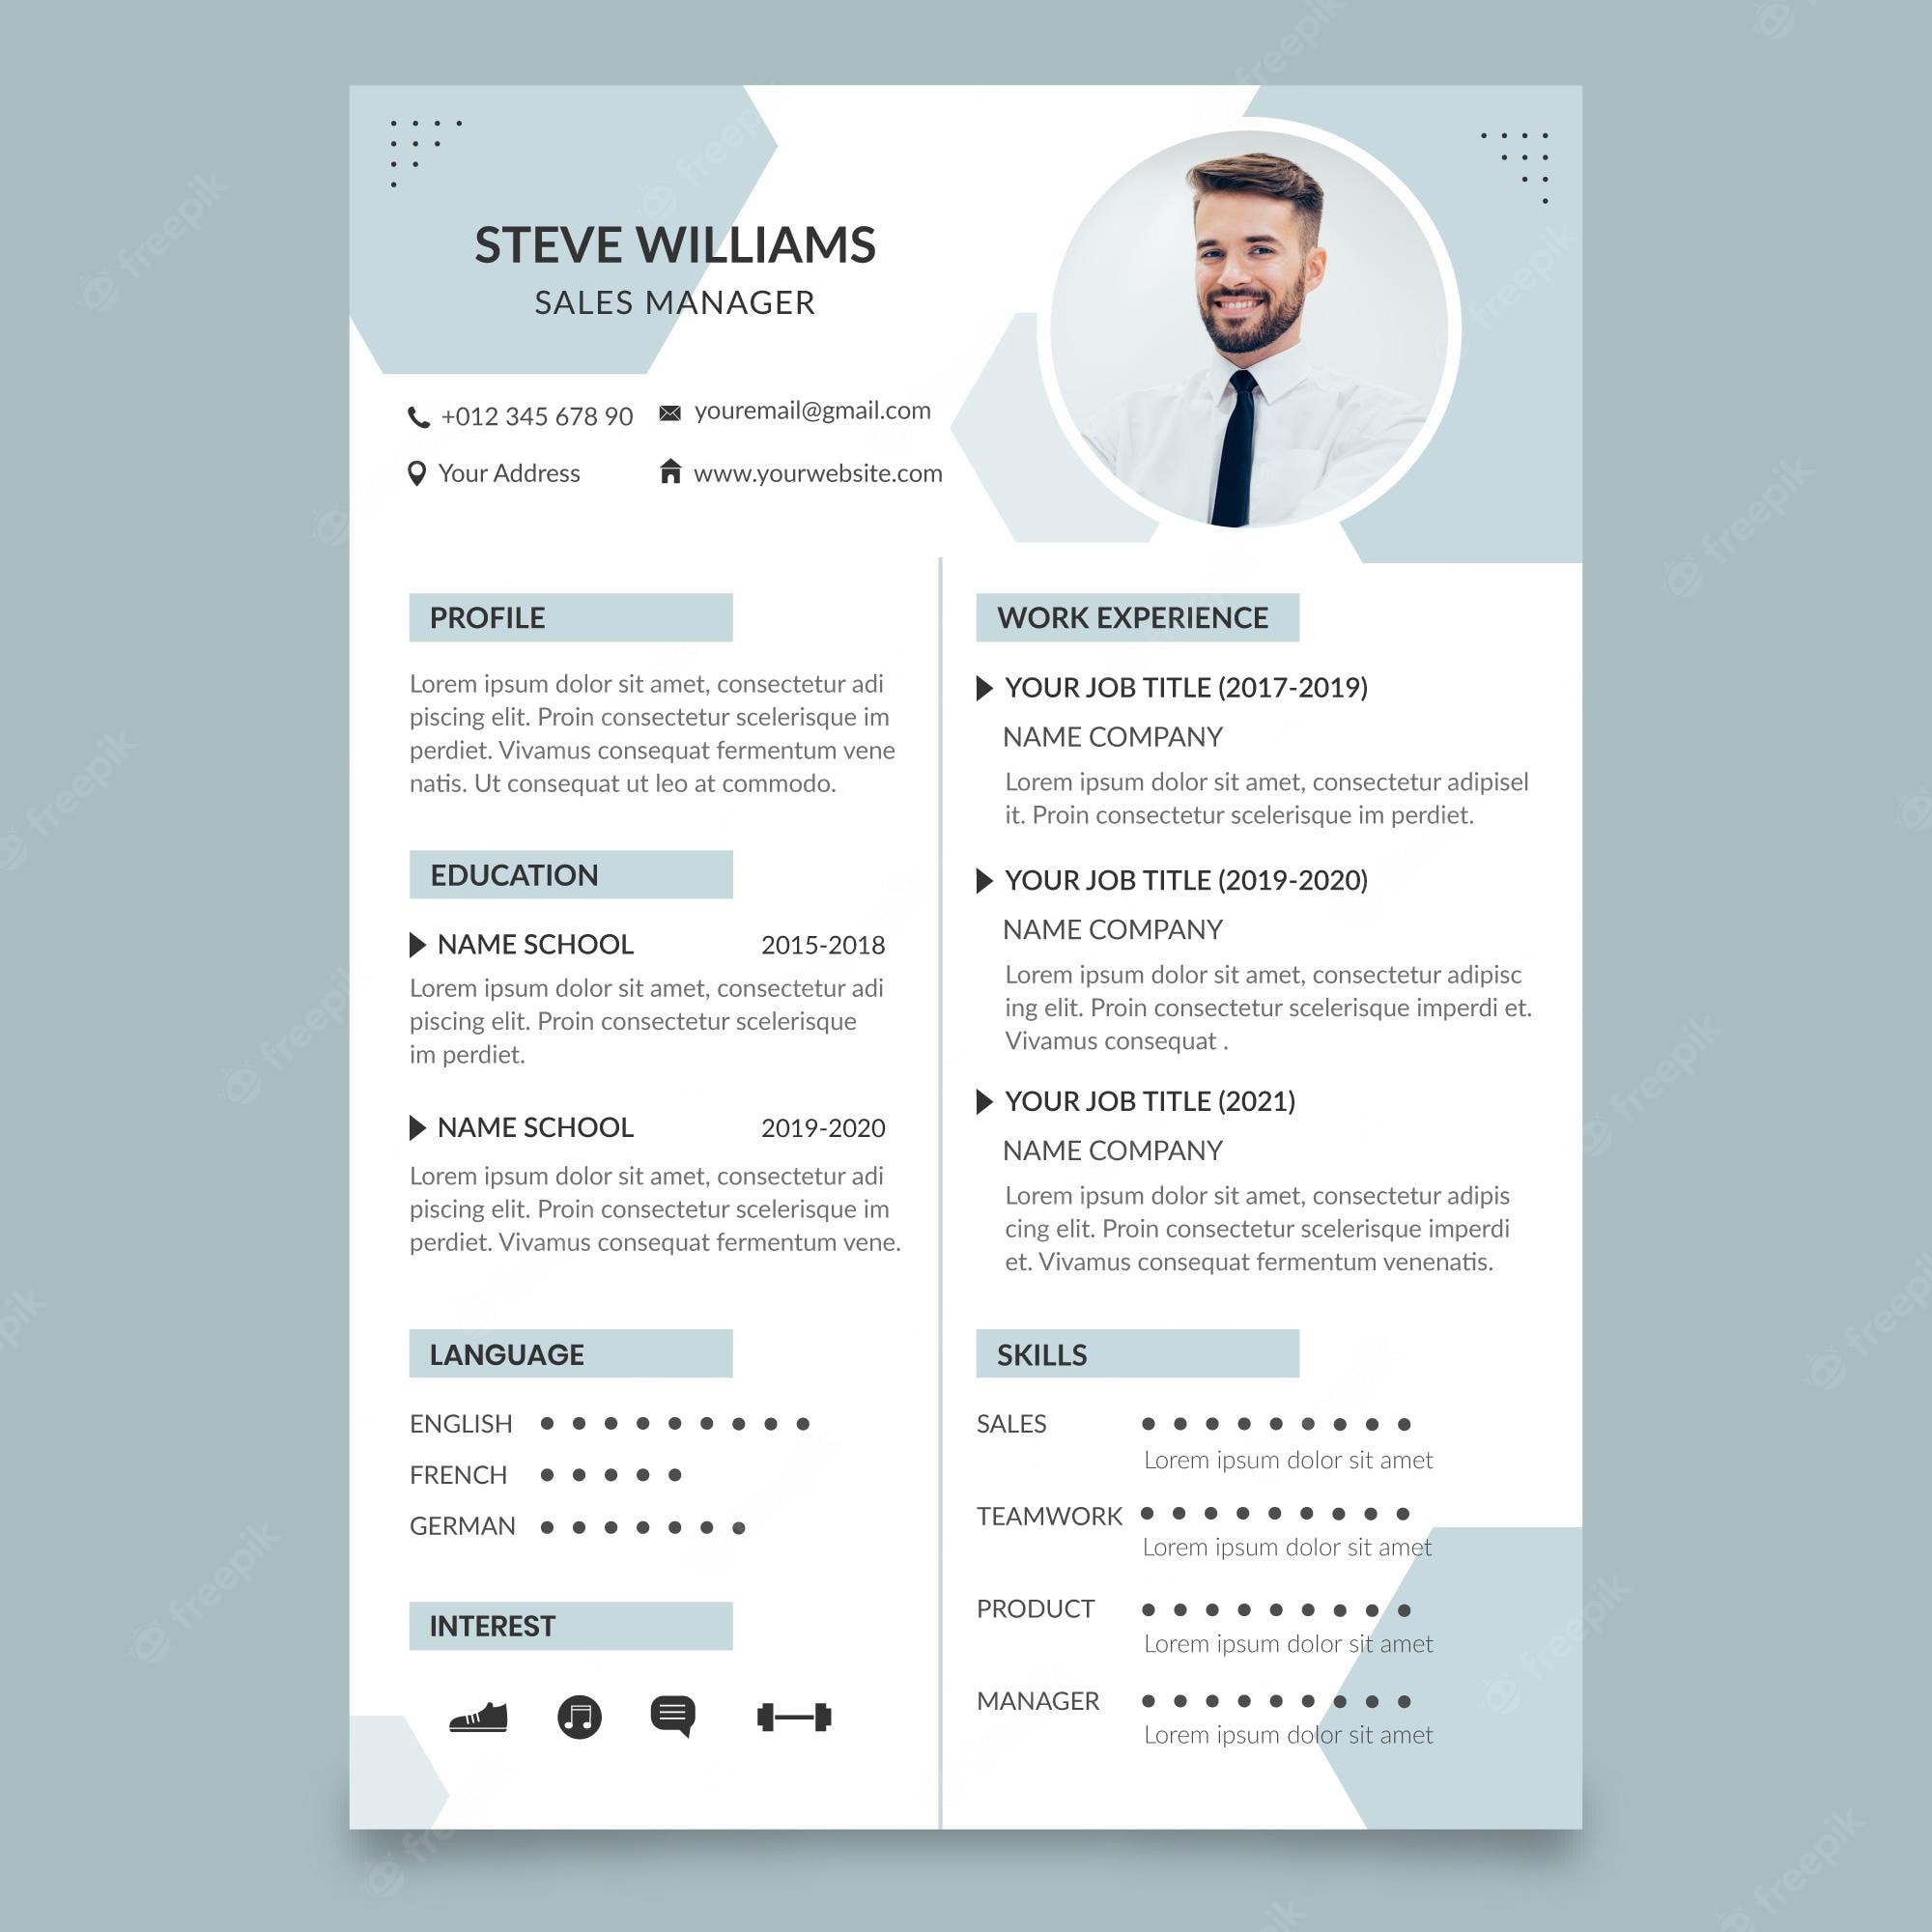 Practical Techniques for Making Your CV Stand Out